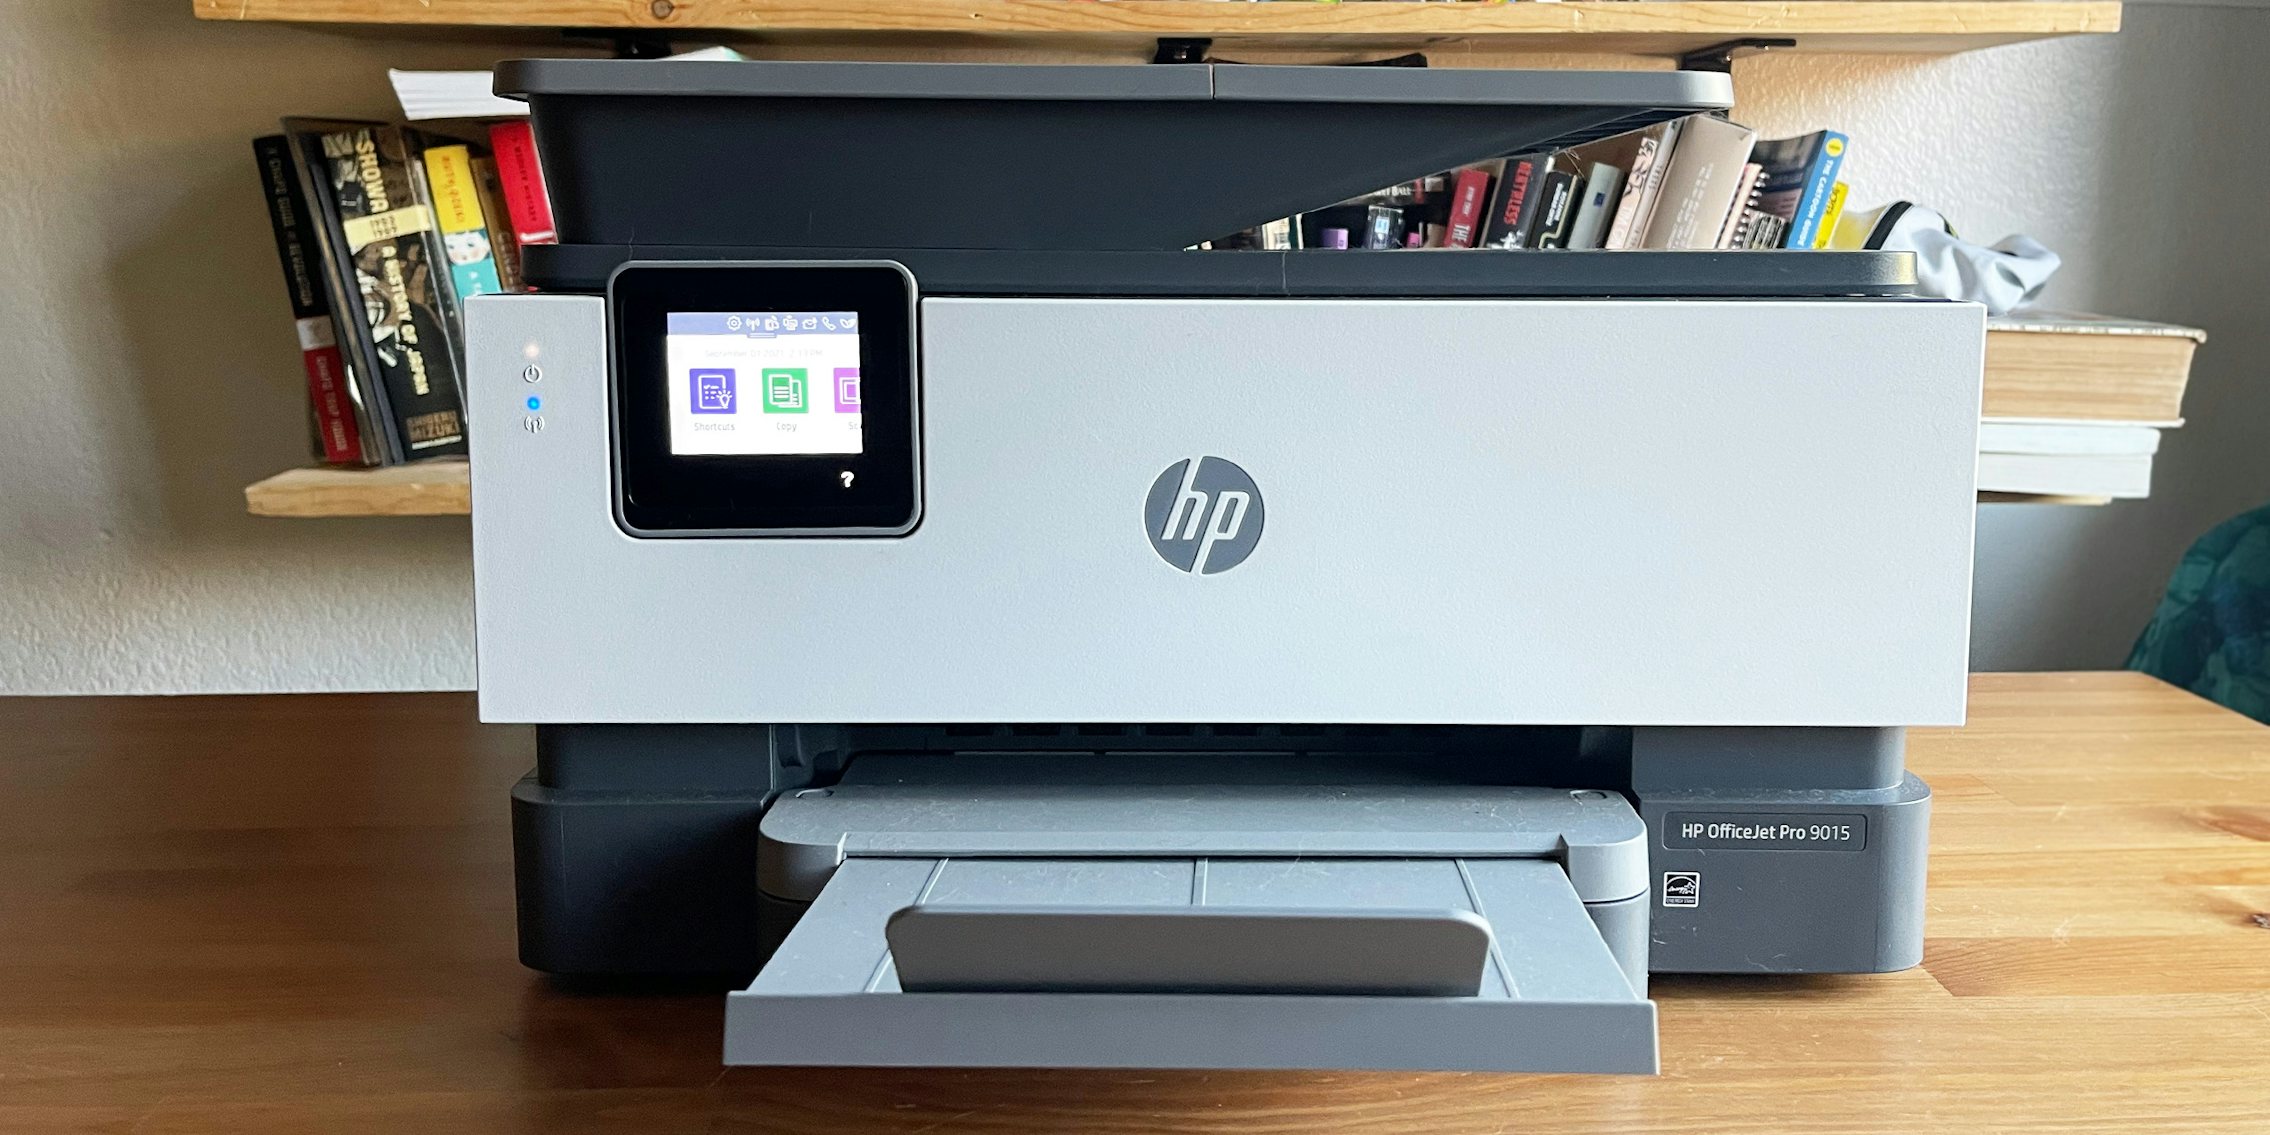 How to Scan, Print, Copy with HP OfficeJet Pro 9015 Printer, Review ? 